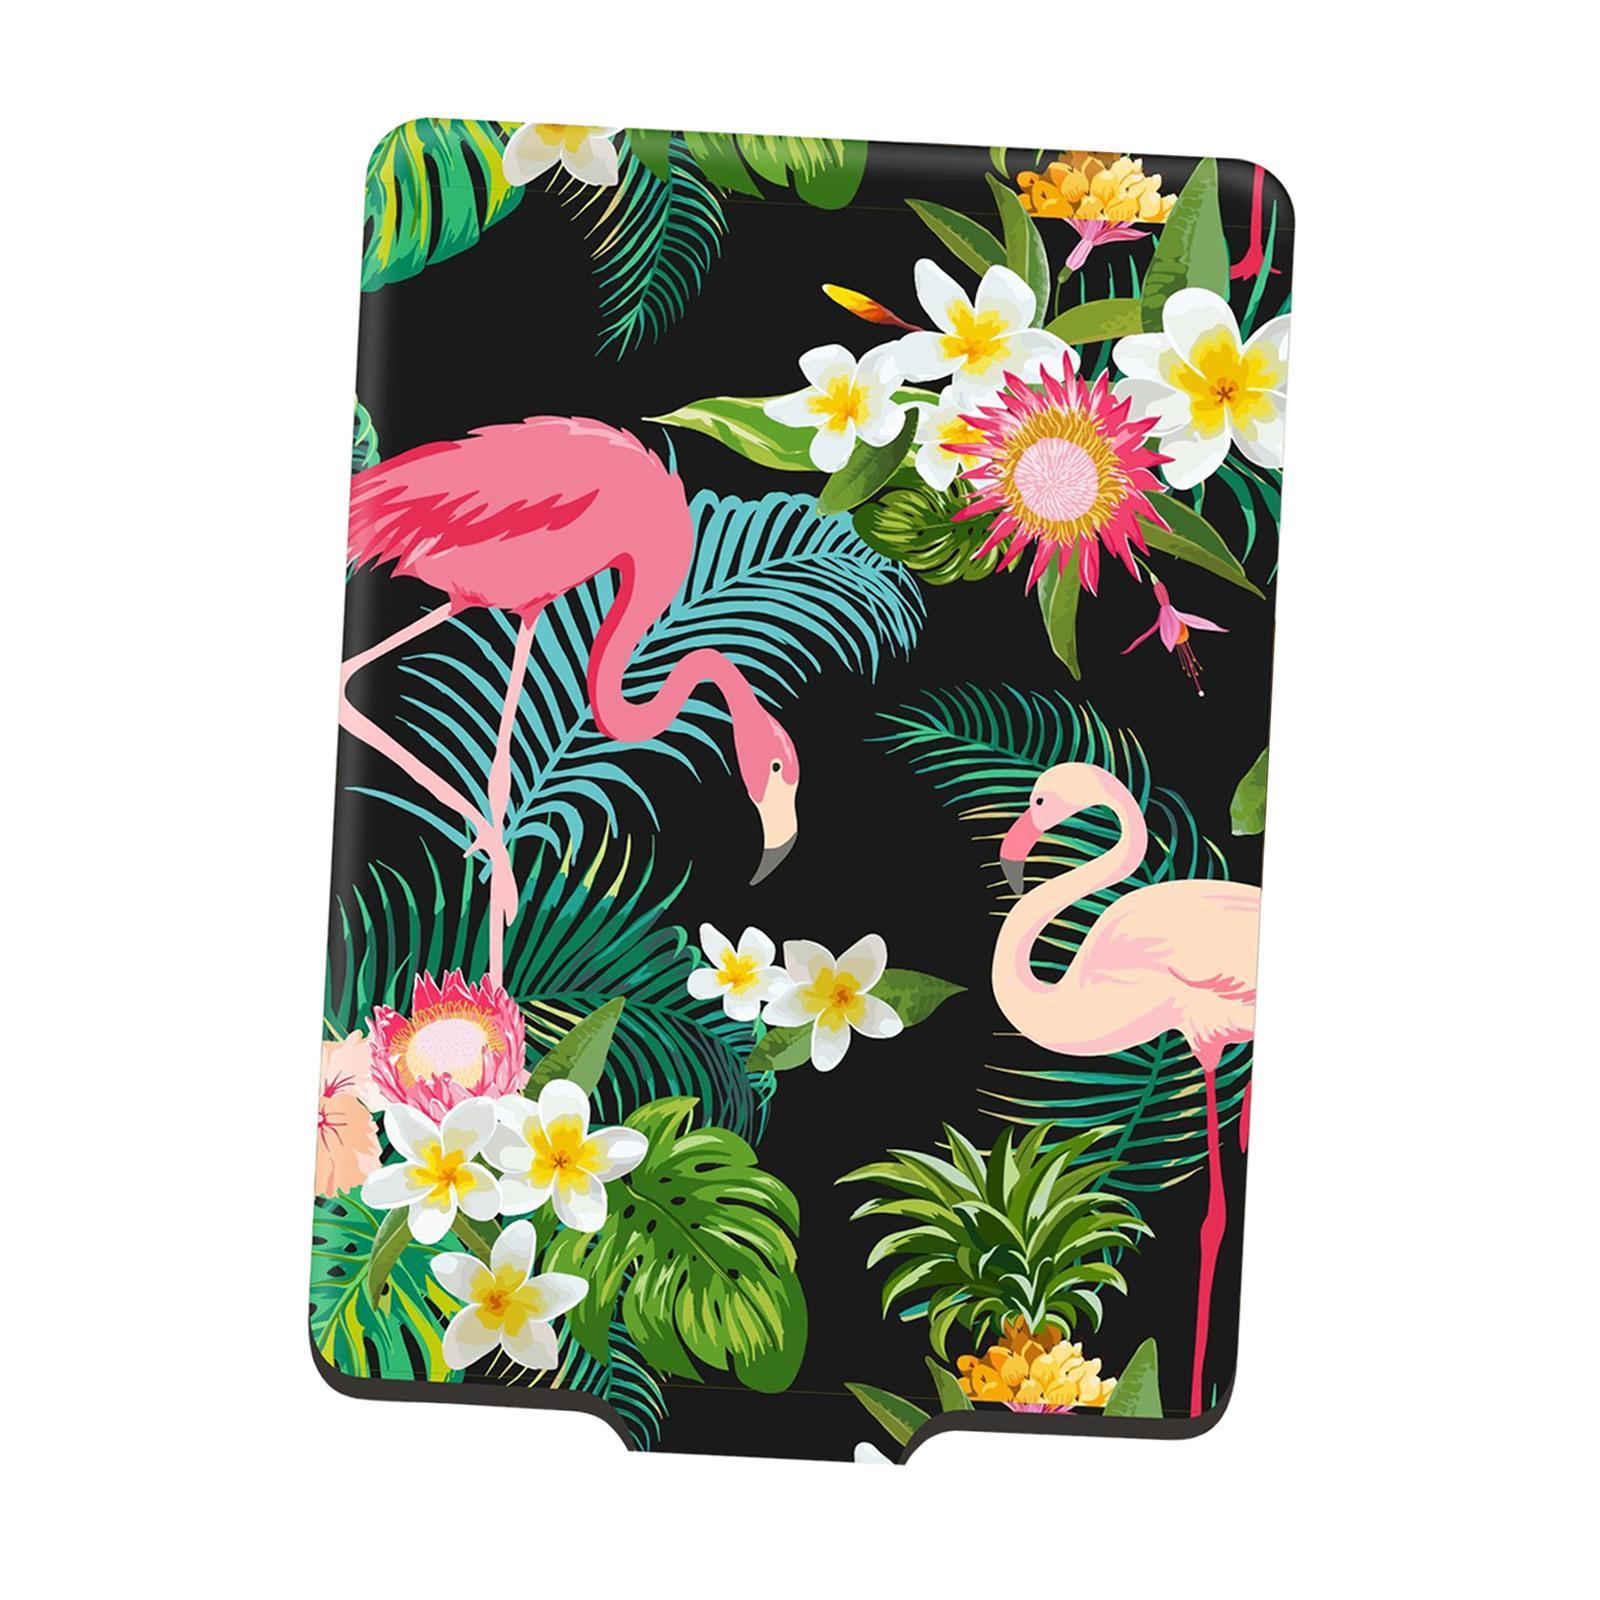 Travel Luggage Cover Luggage Supplies Flower Flamingo Print Zipper Closure Washable Fashion Elastic Suitcase Protective Cover - S